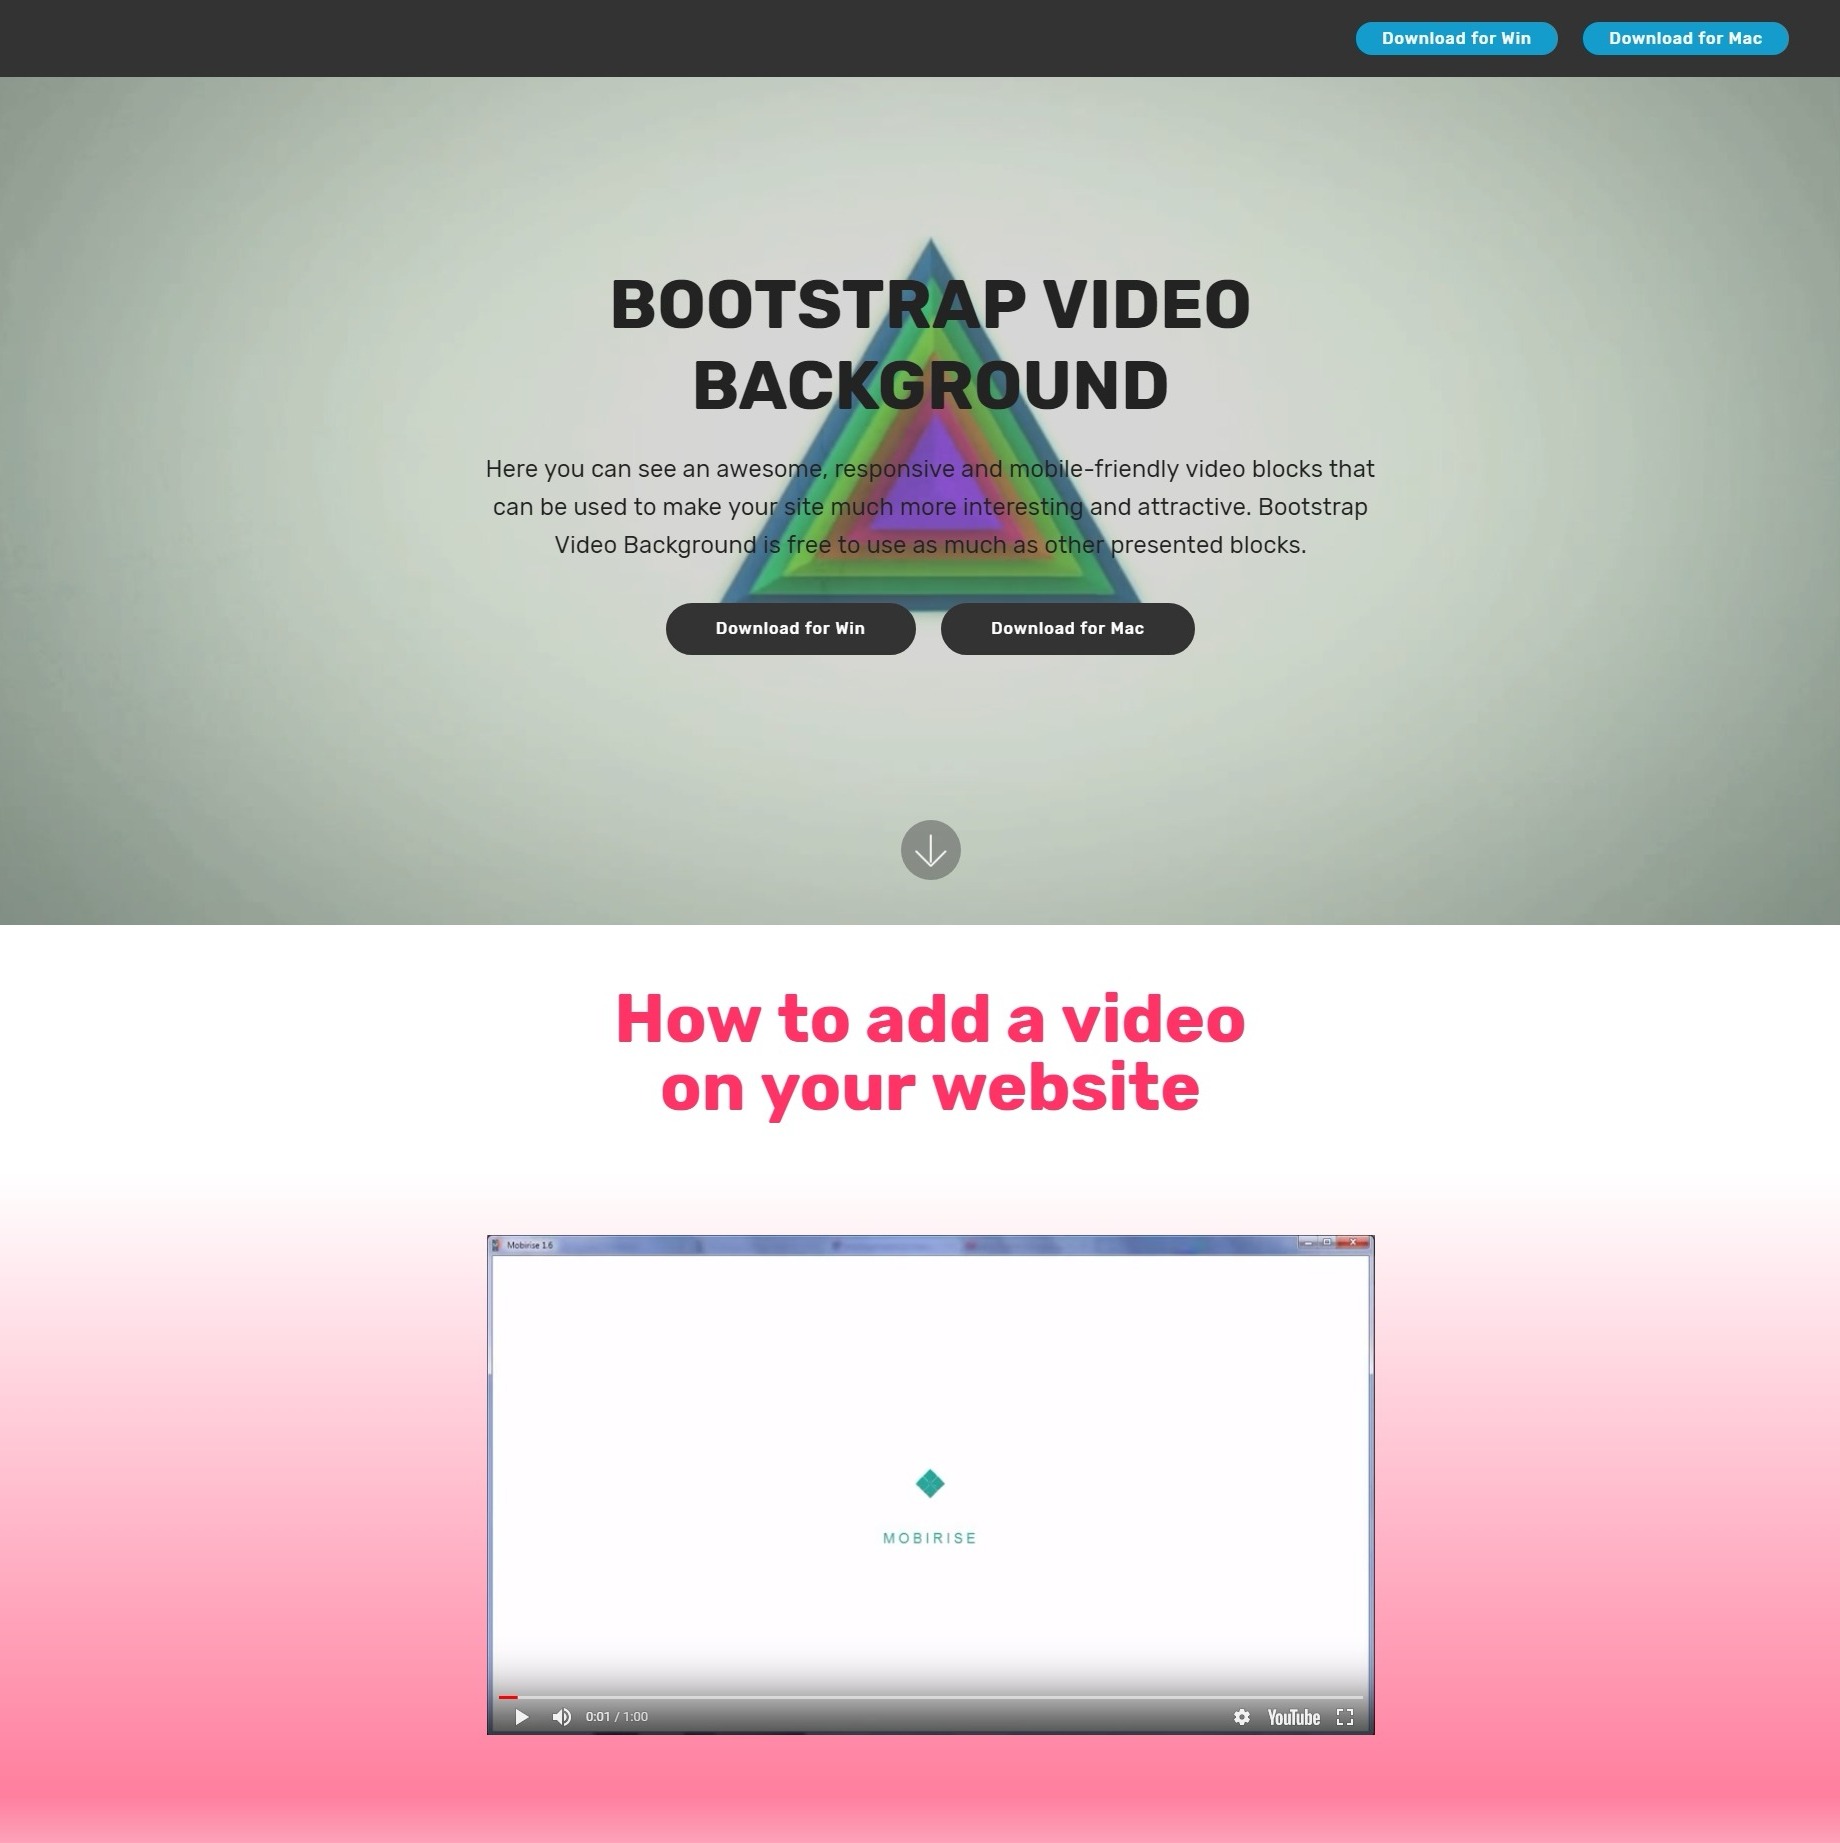 Brand New CSS3 Bootstrap Carousel Video Backgrounds and Collapse Menu Demos